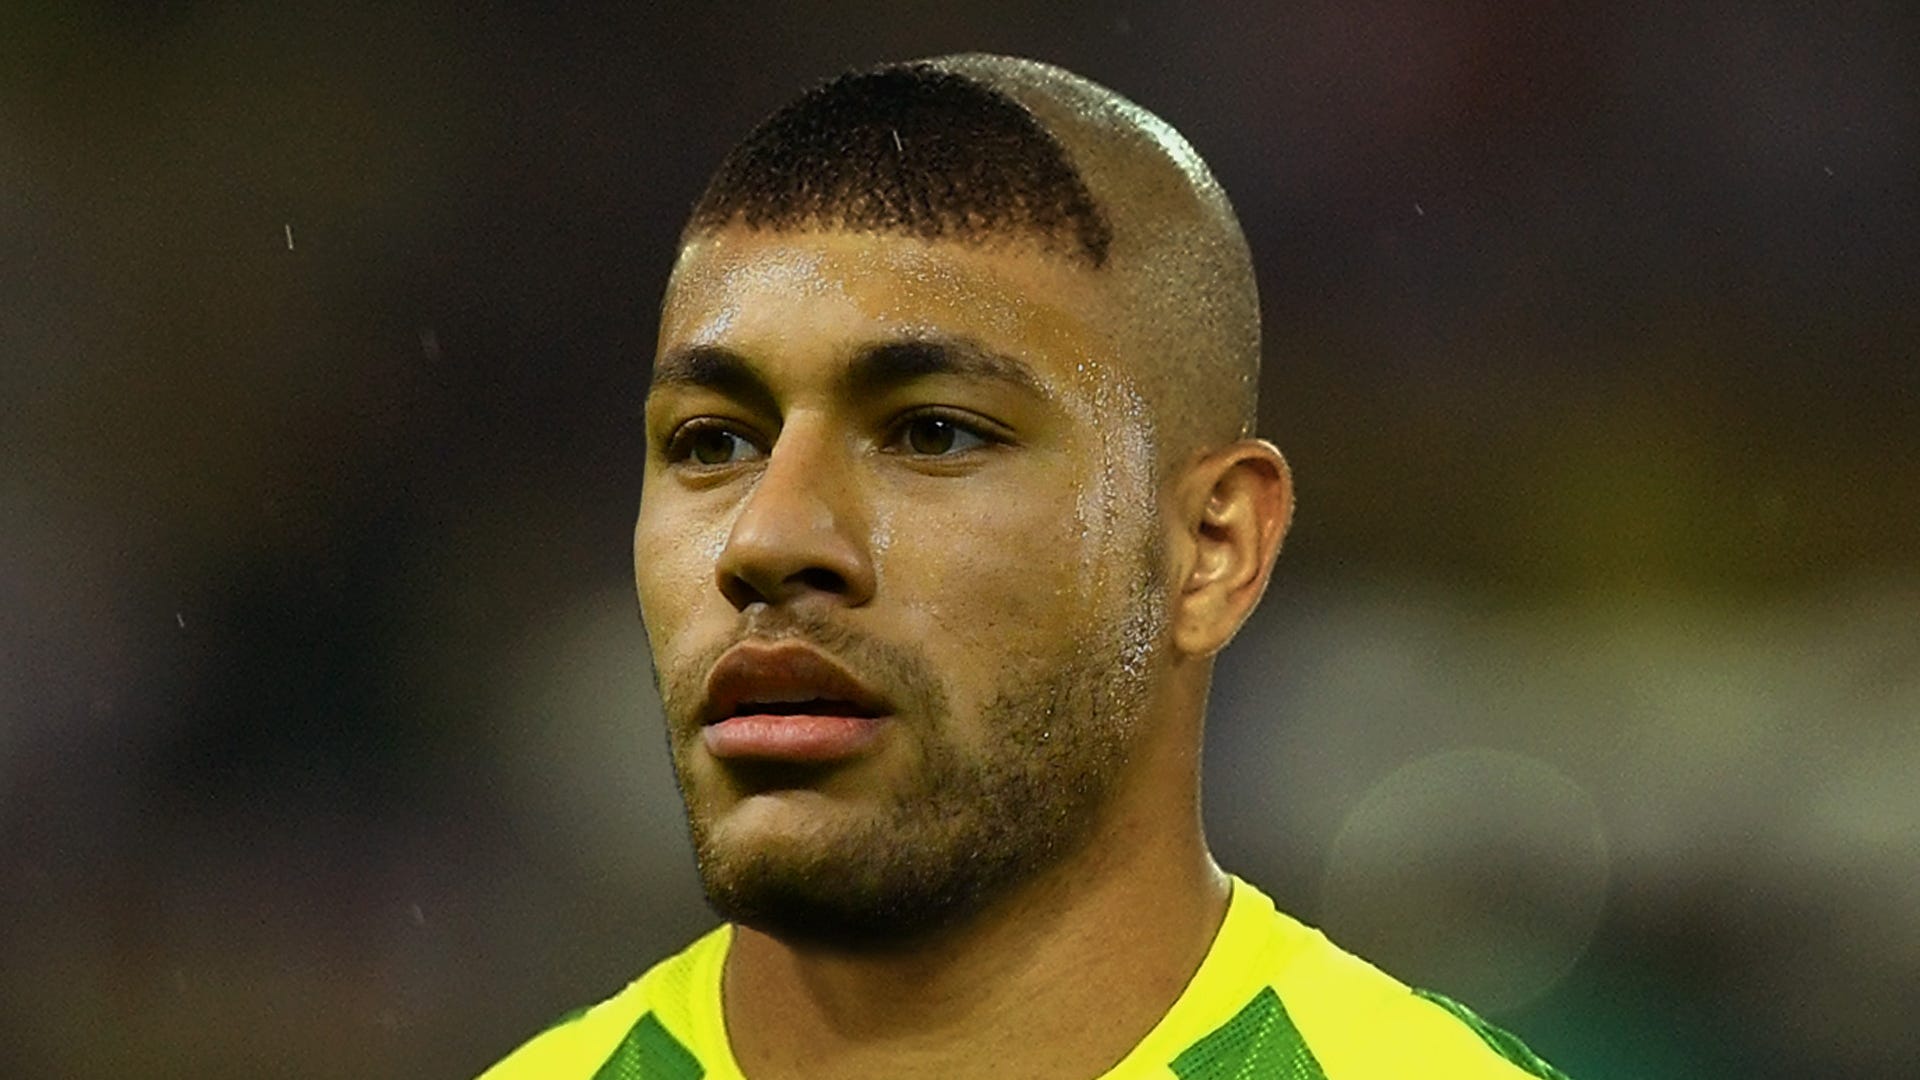 Neymars new hairstyle lampooned by Twitter  theScorecom